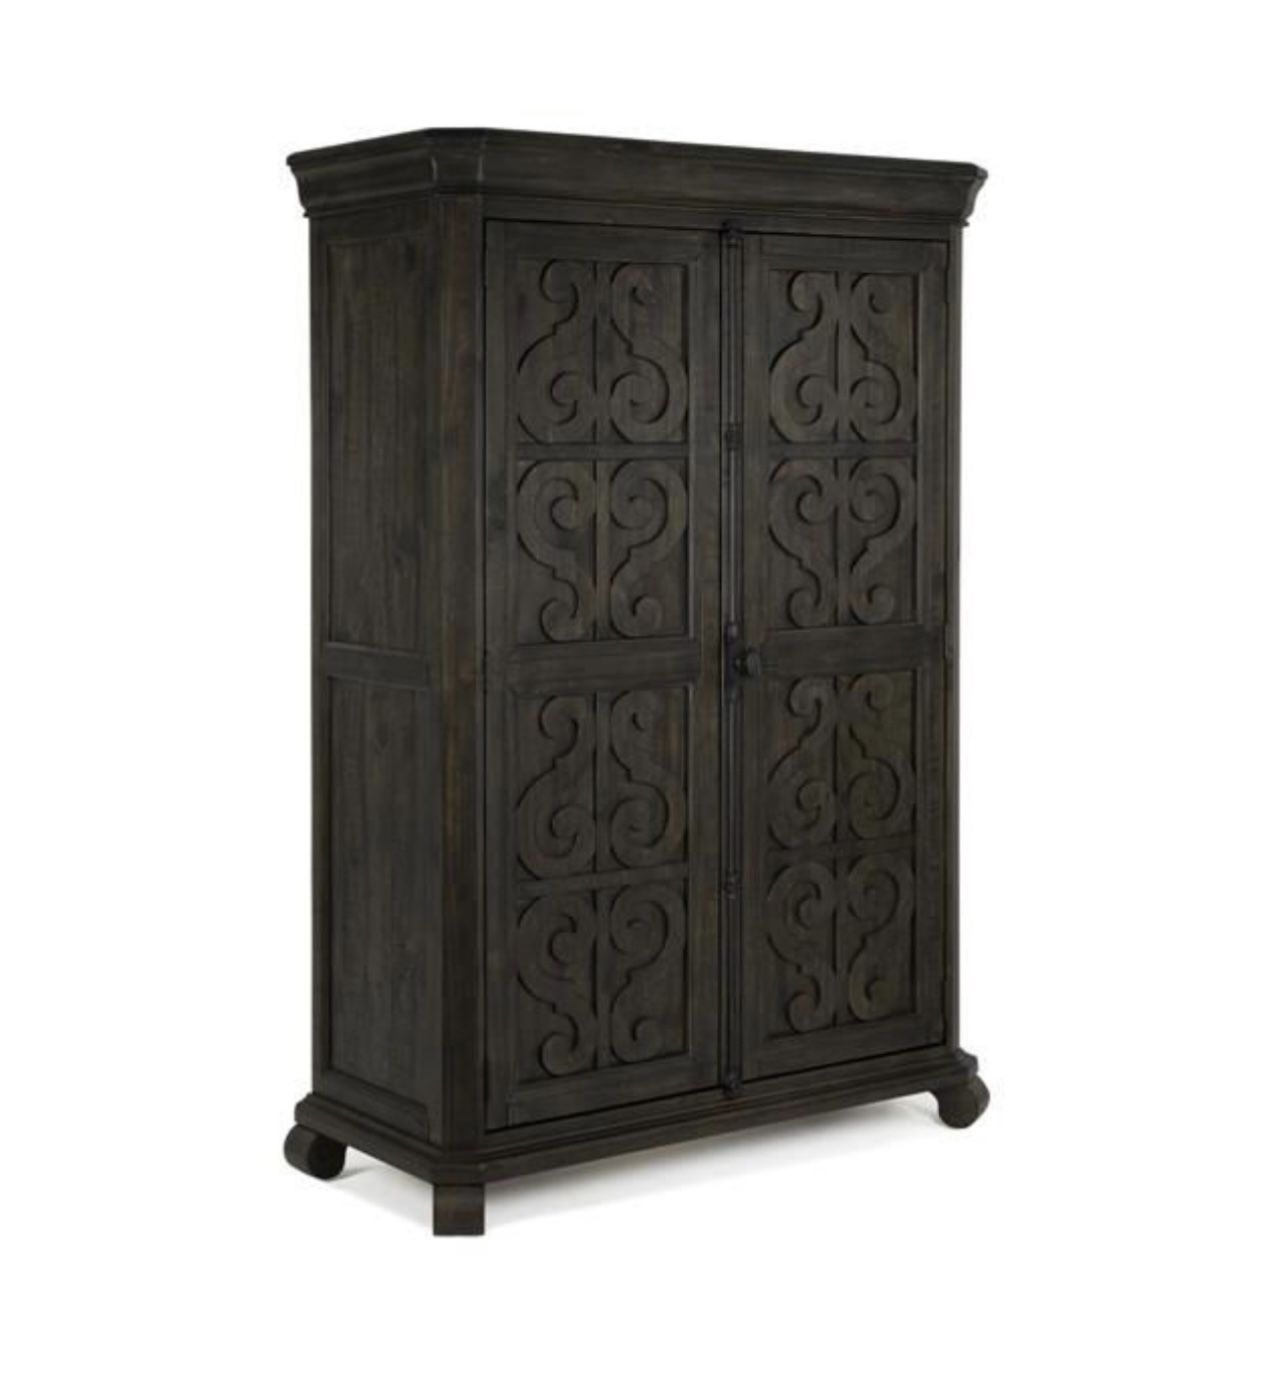 Armoire Charcoal 